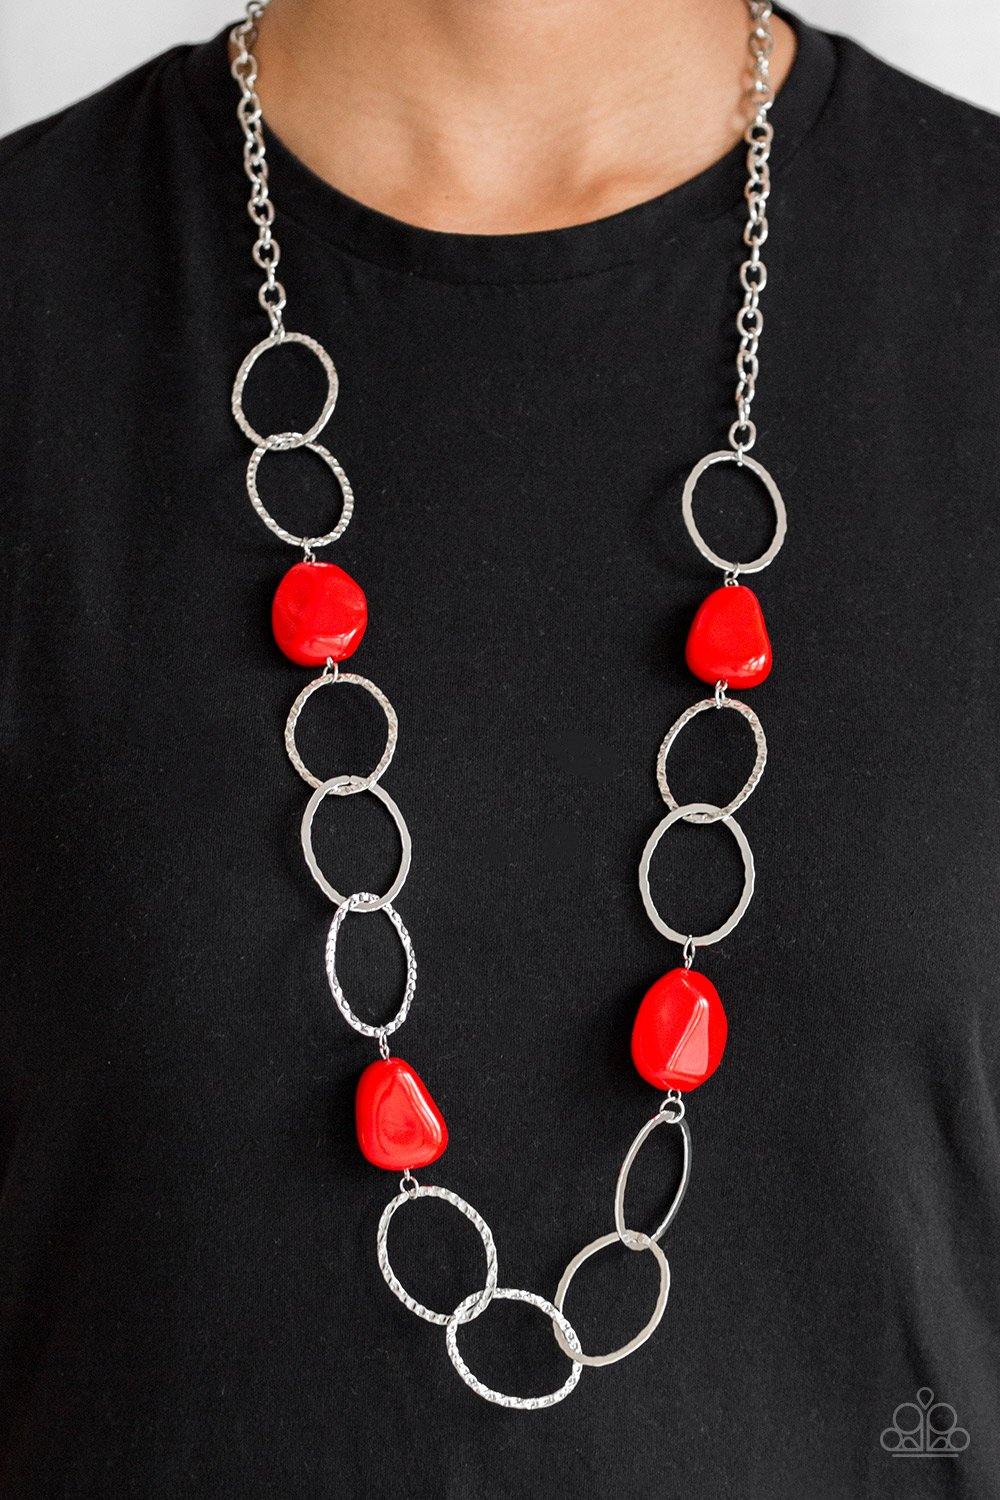 Modern Day Malibu - Red Necklace - Paparazzi Accessories - Sassysblingandthings